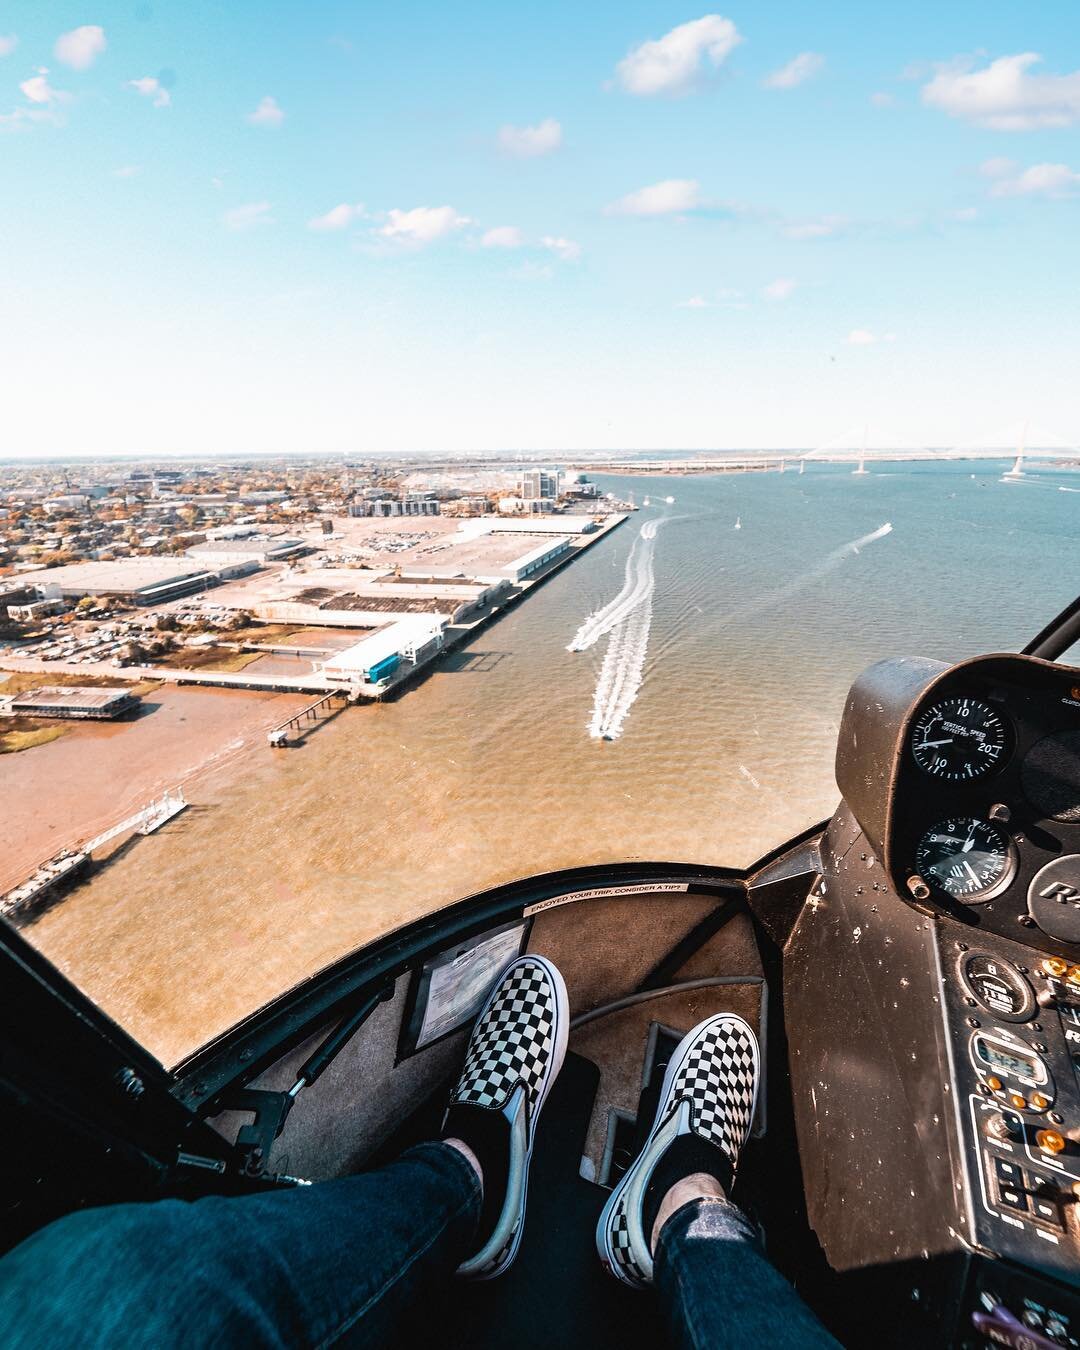 Told y&rsquo;all I was taking my photography to new heights 😏
&bull;
&bull;
&bull;
&bull;
&bull;
 #adventure #travel #up #photographer #photography #charleston #sc #coast #eastcoast #helicopter #sky #ocean #beach #shoreline #shoes #fromuphere #trave